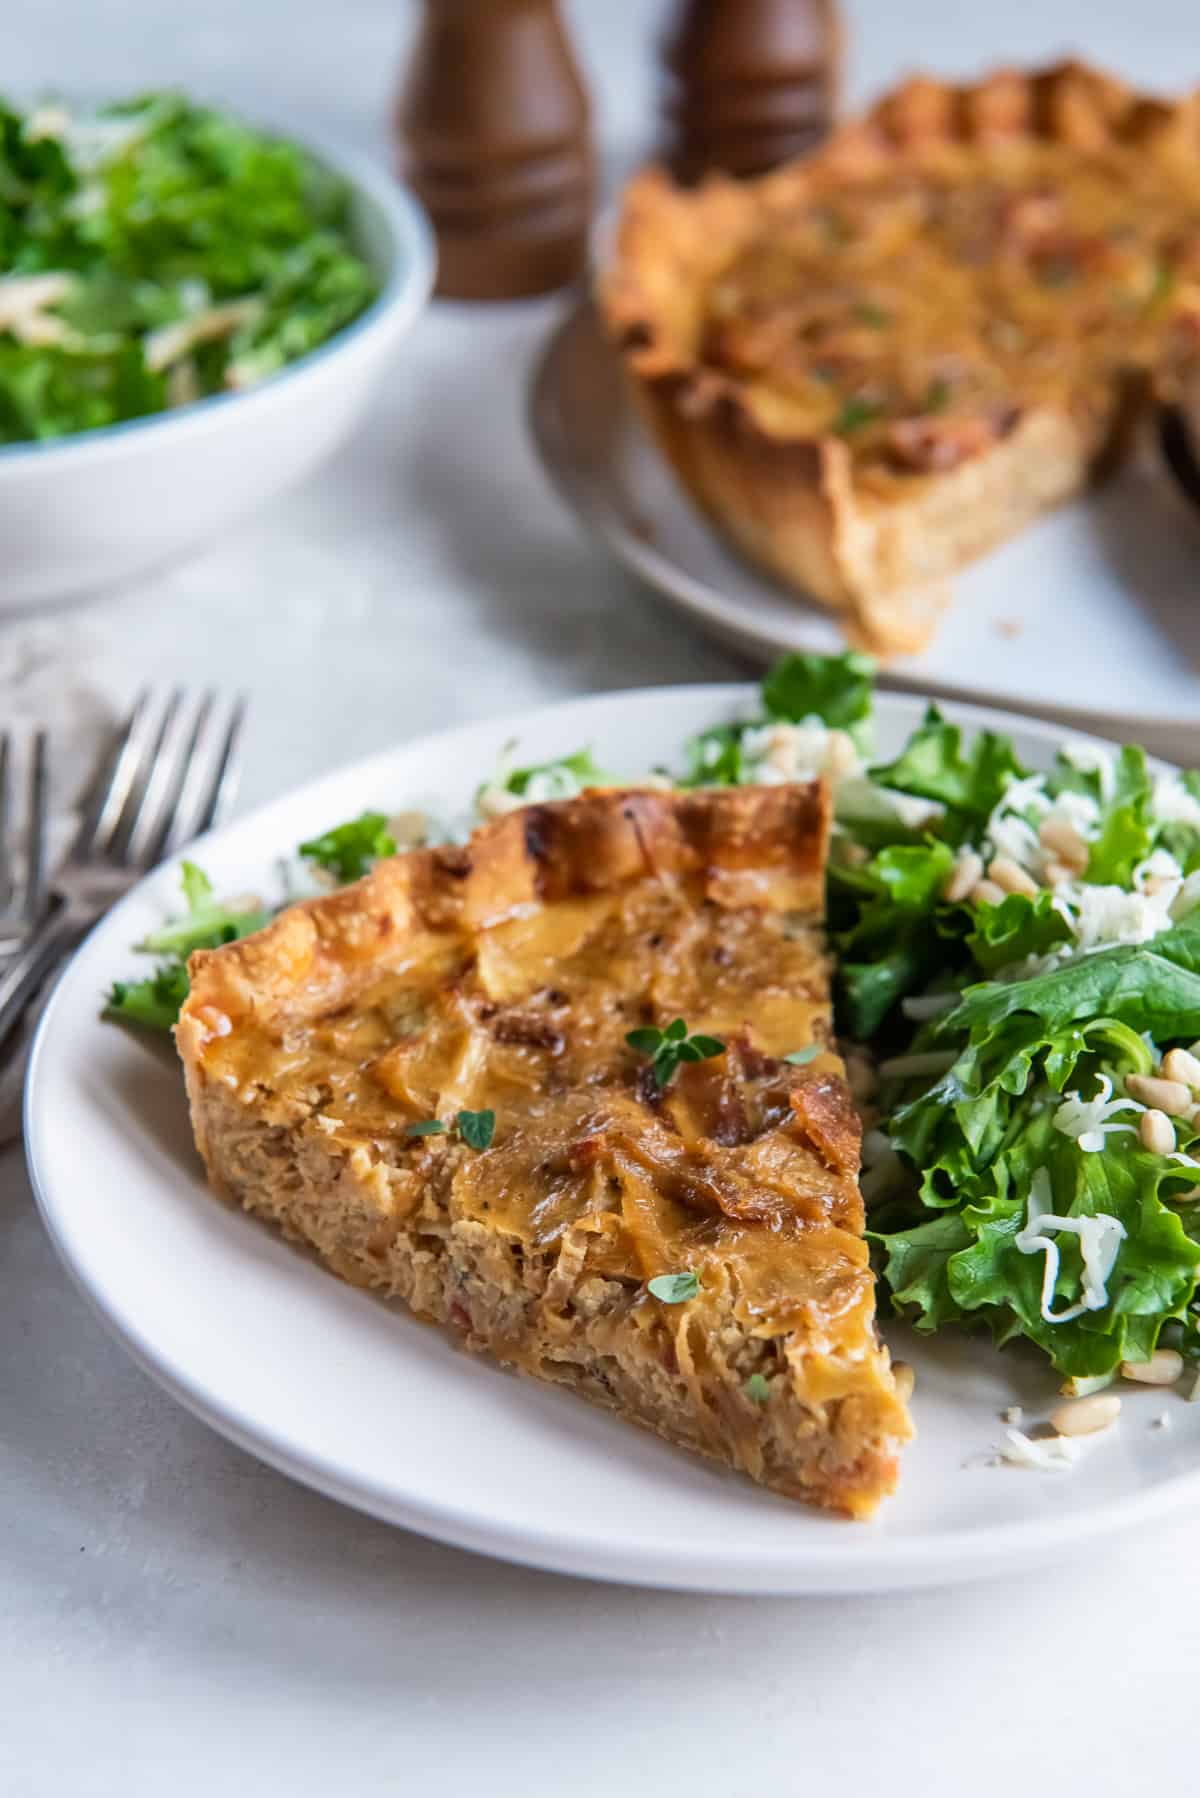 A plate with a slice of onion tart and green salad on a table.